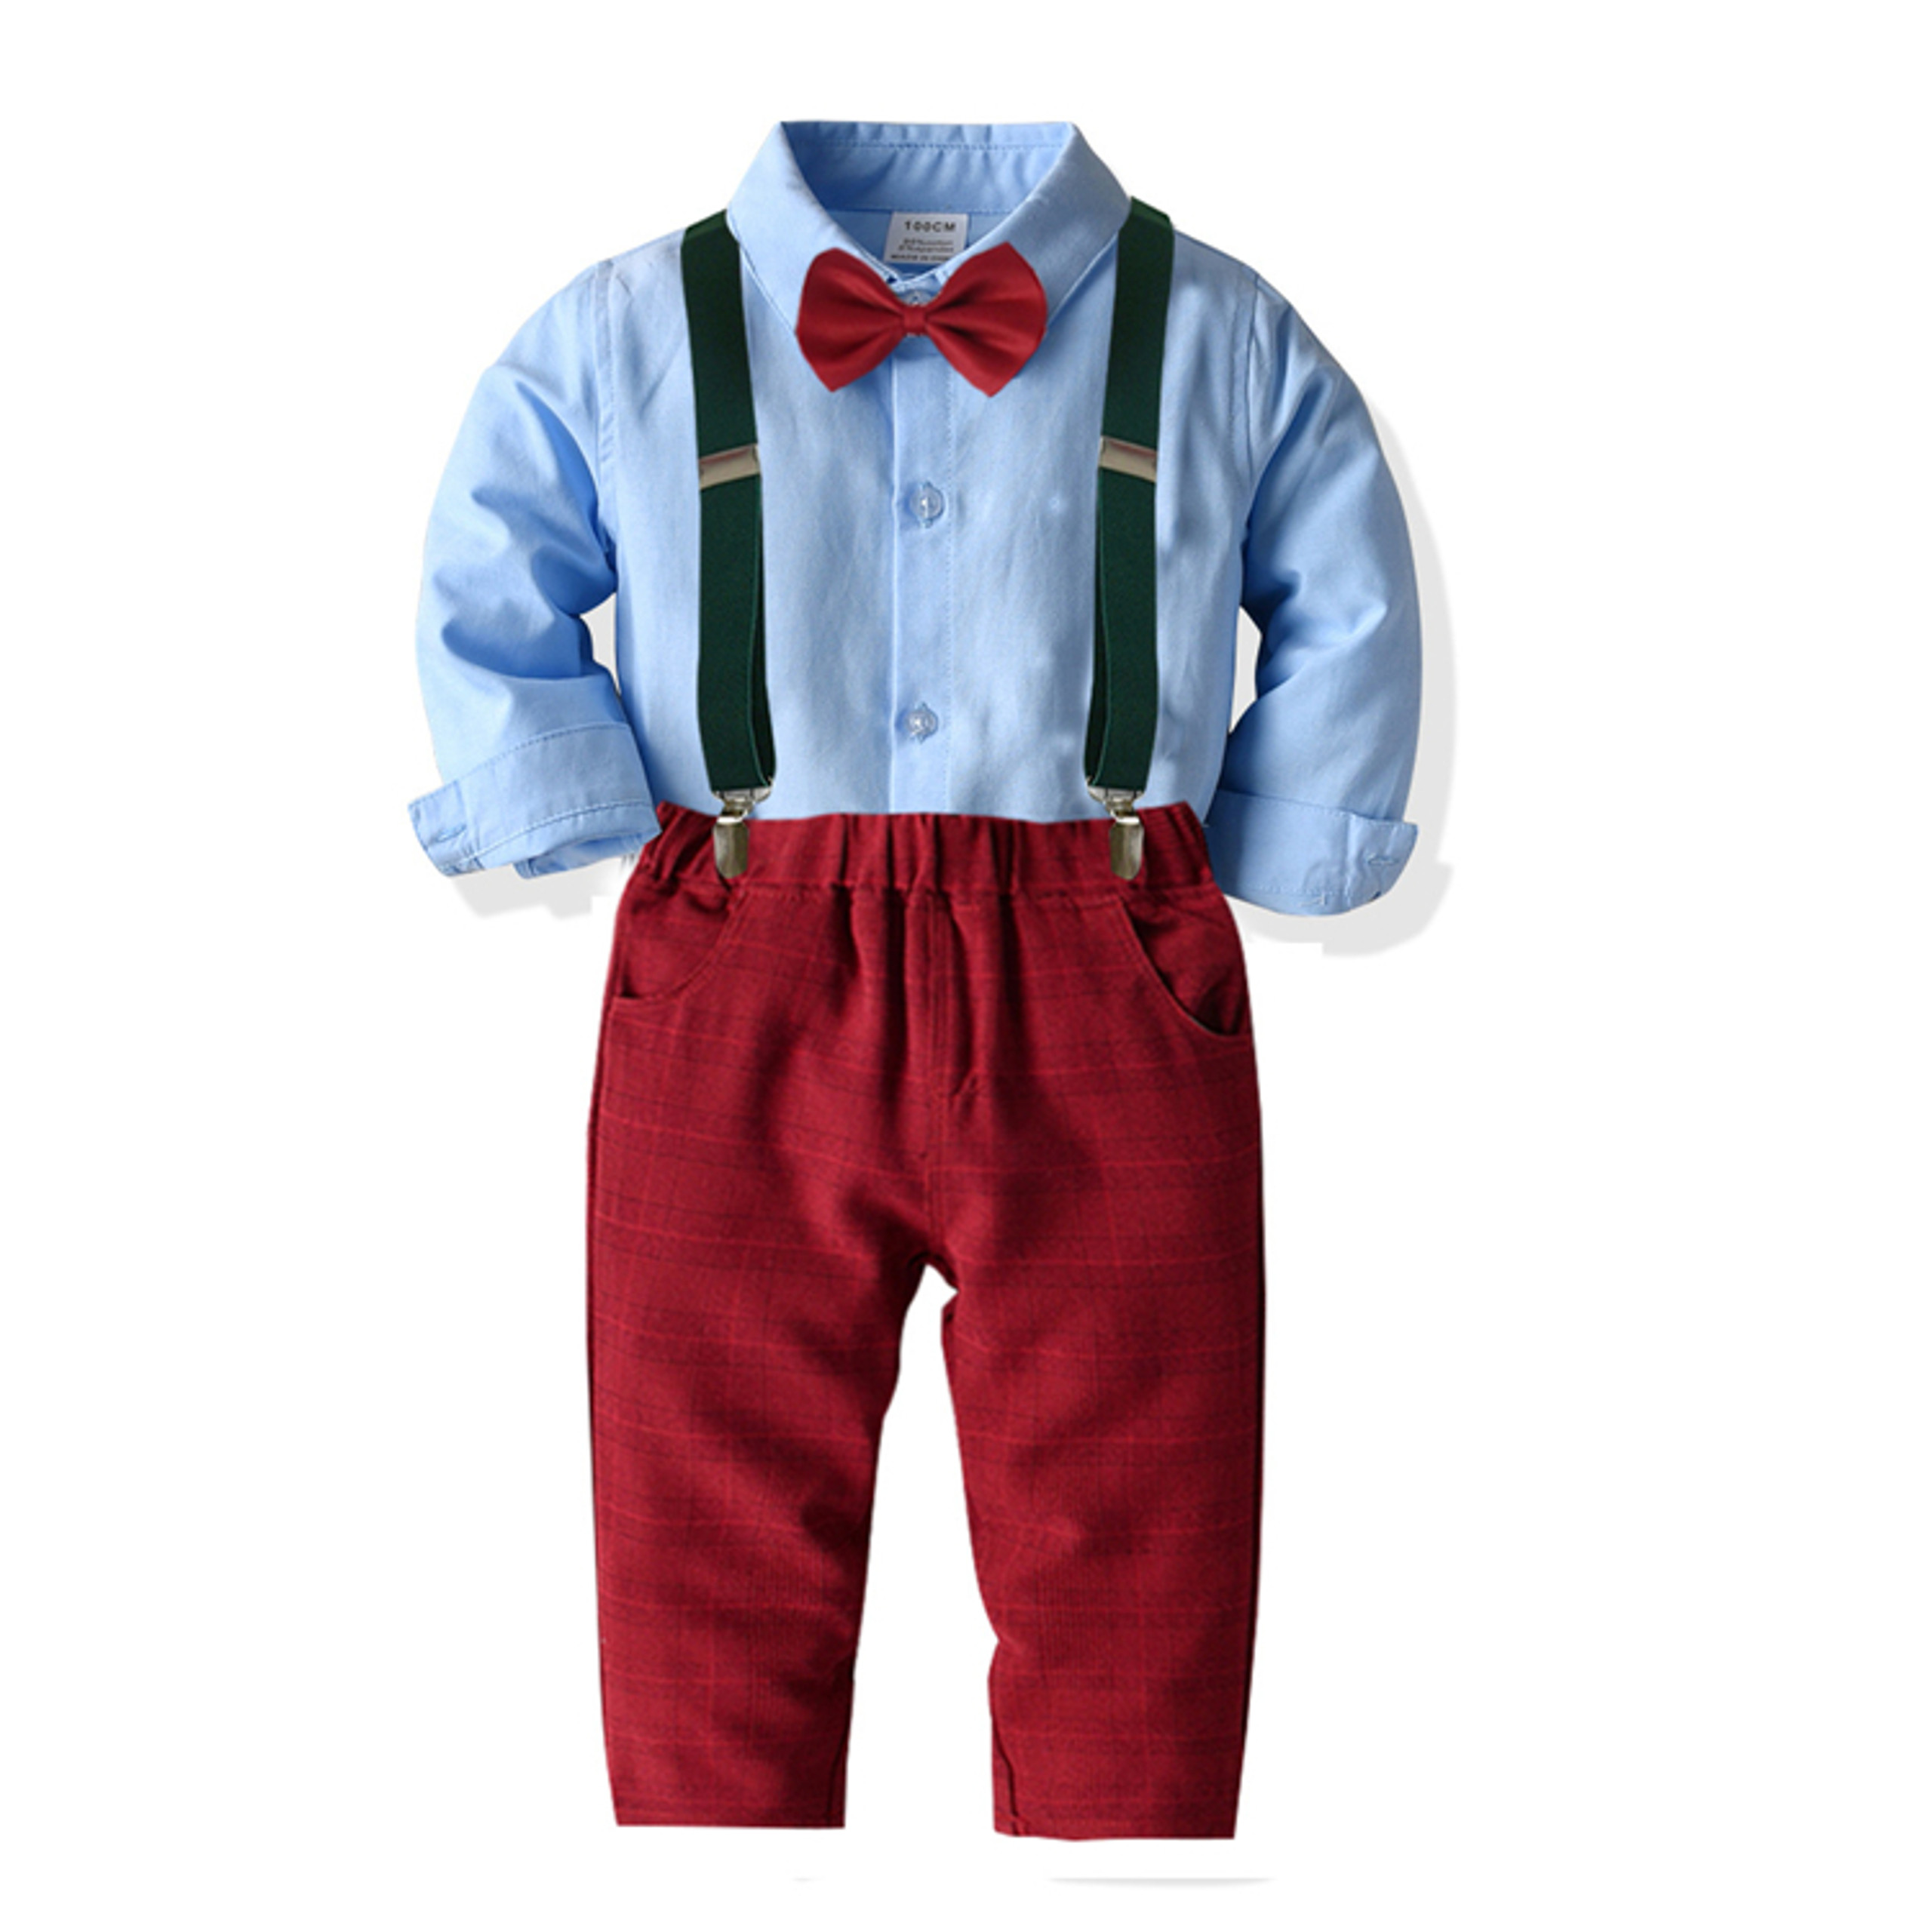 Kris Button-Up Shirt and Red Pants Suspenders Set